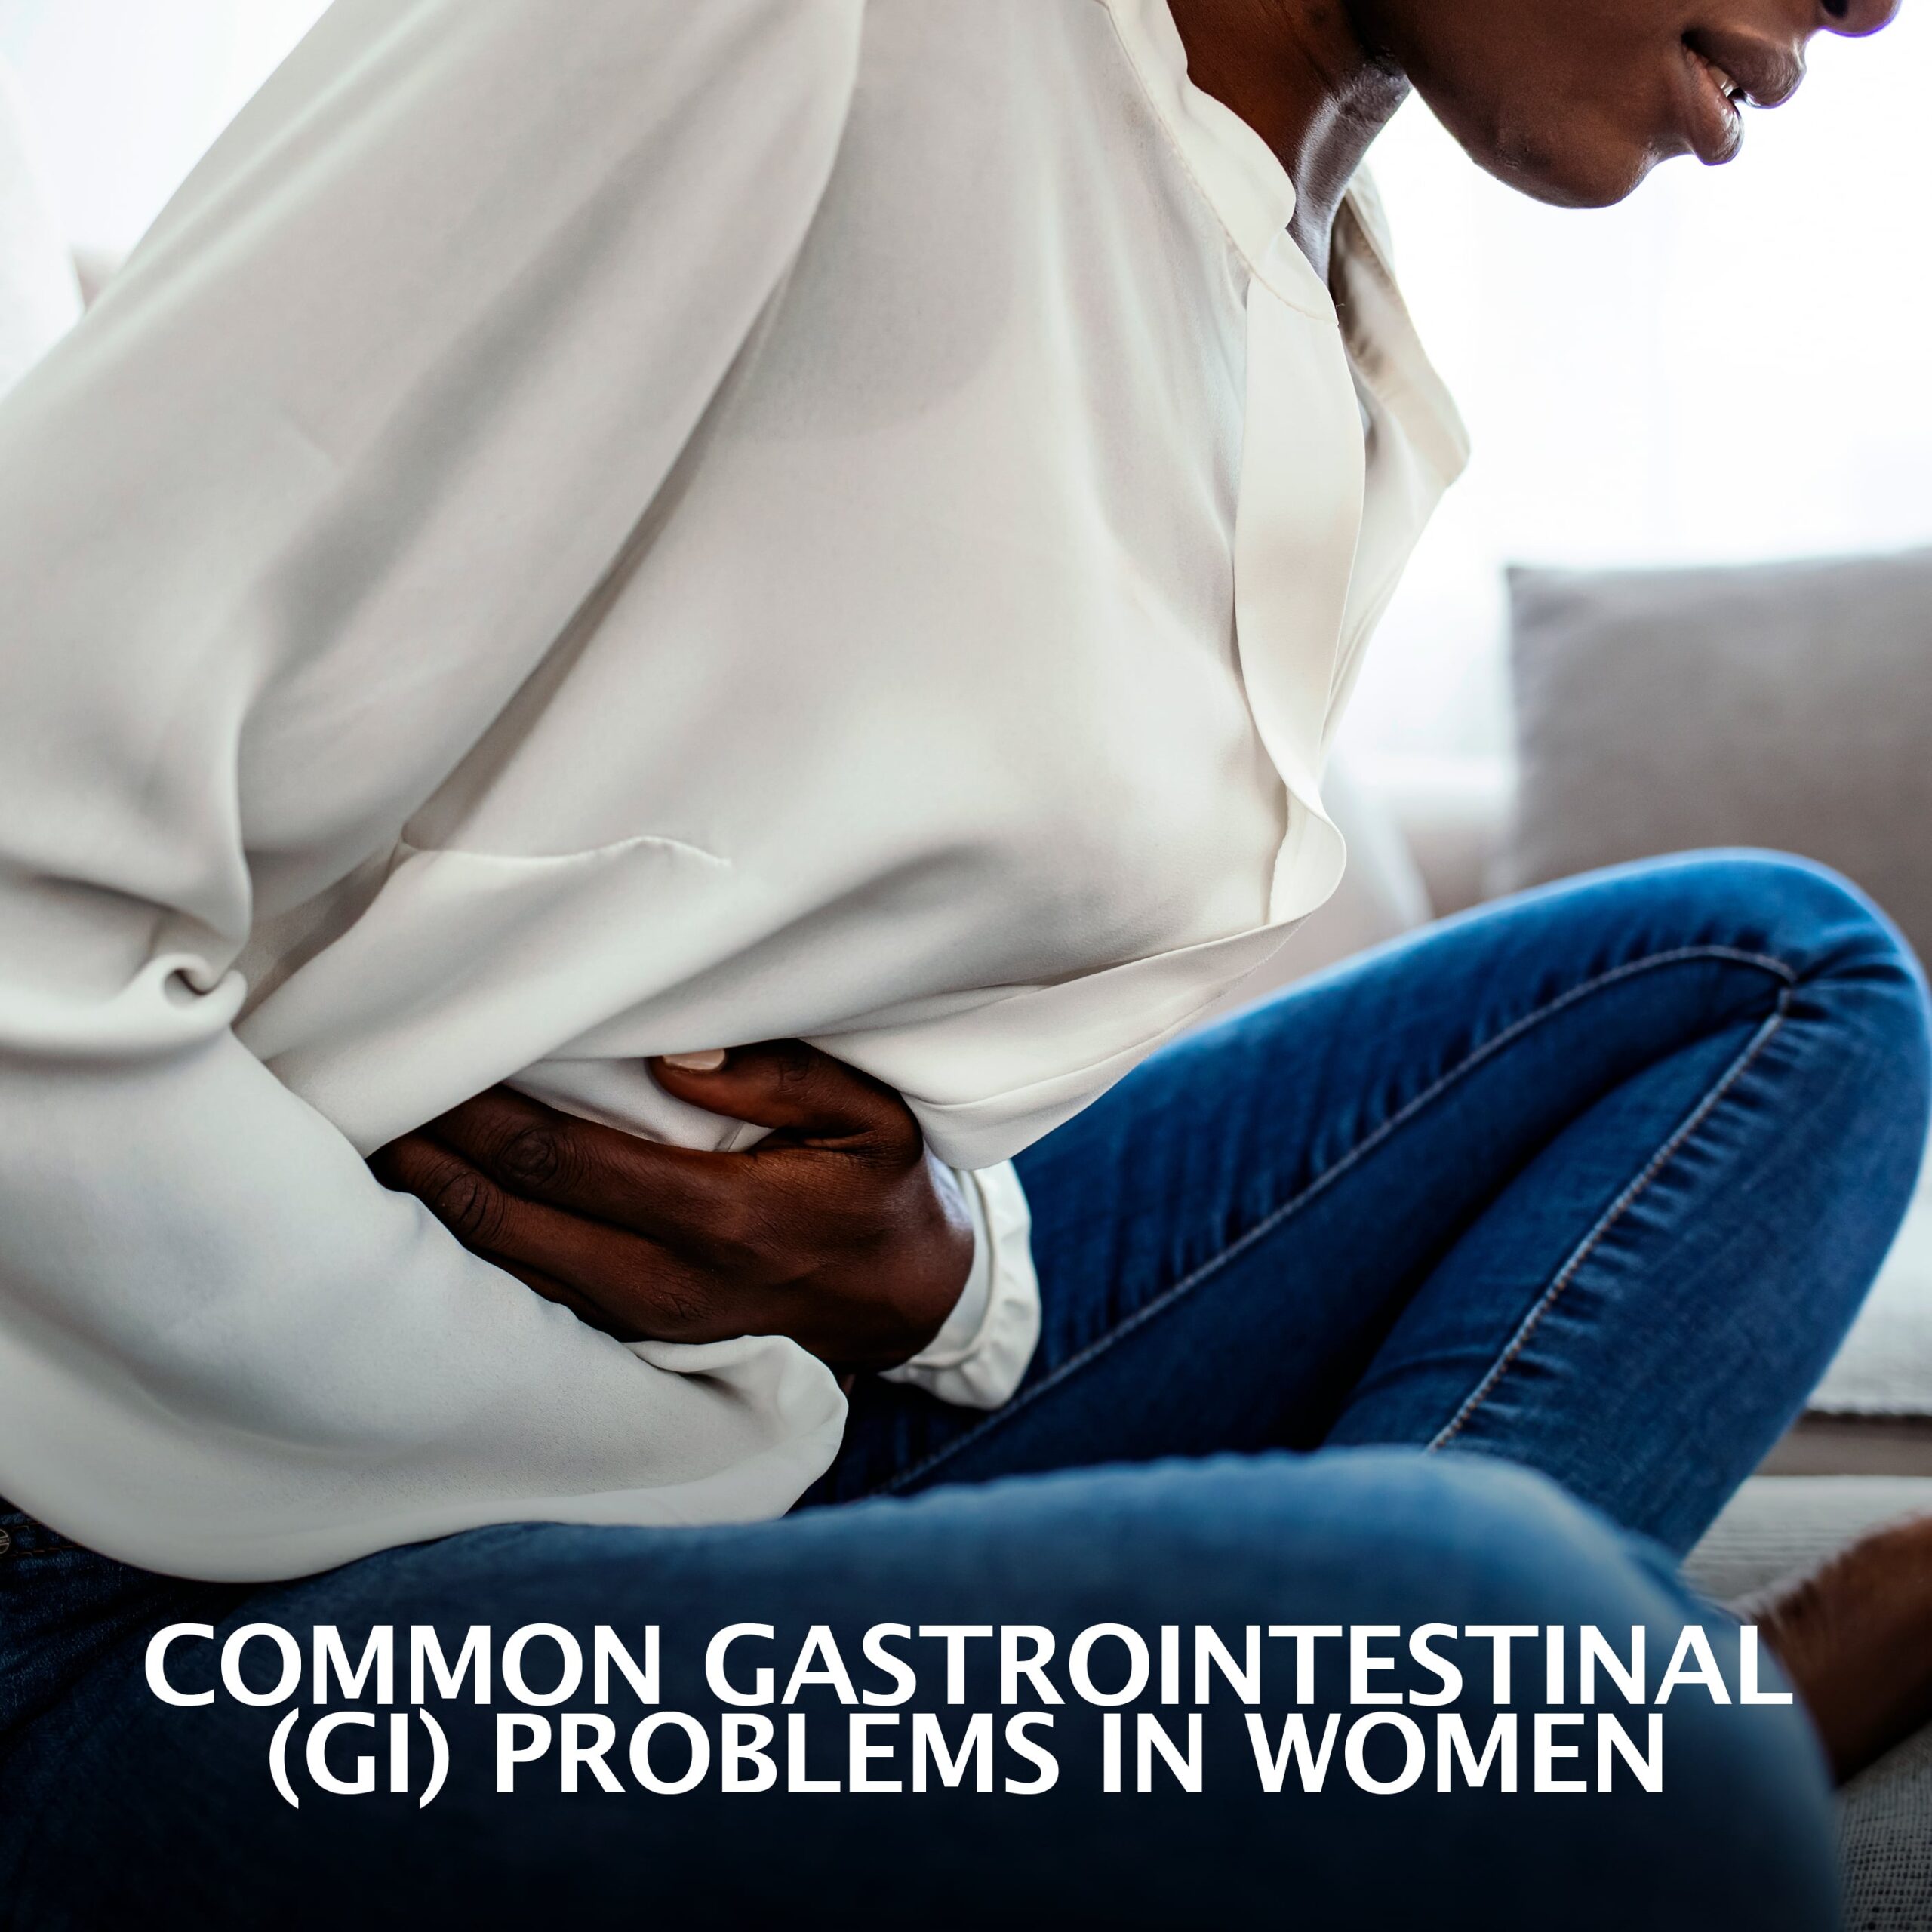 common gi problems in women graphic